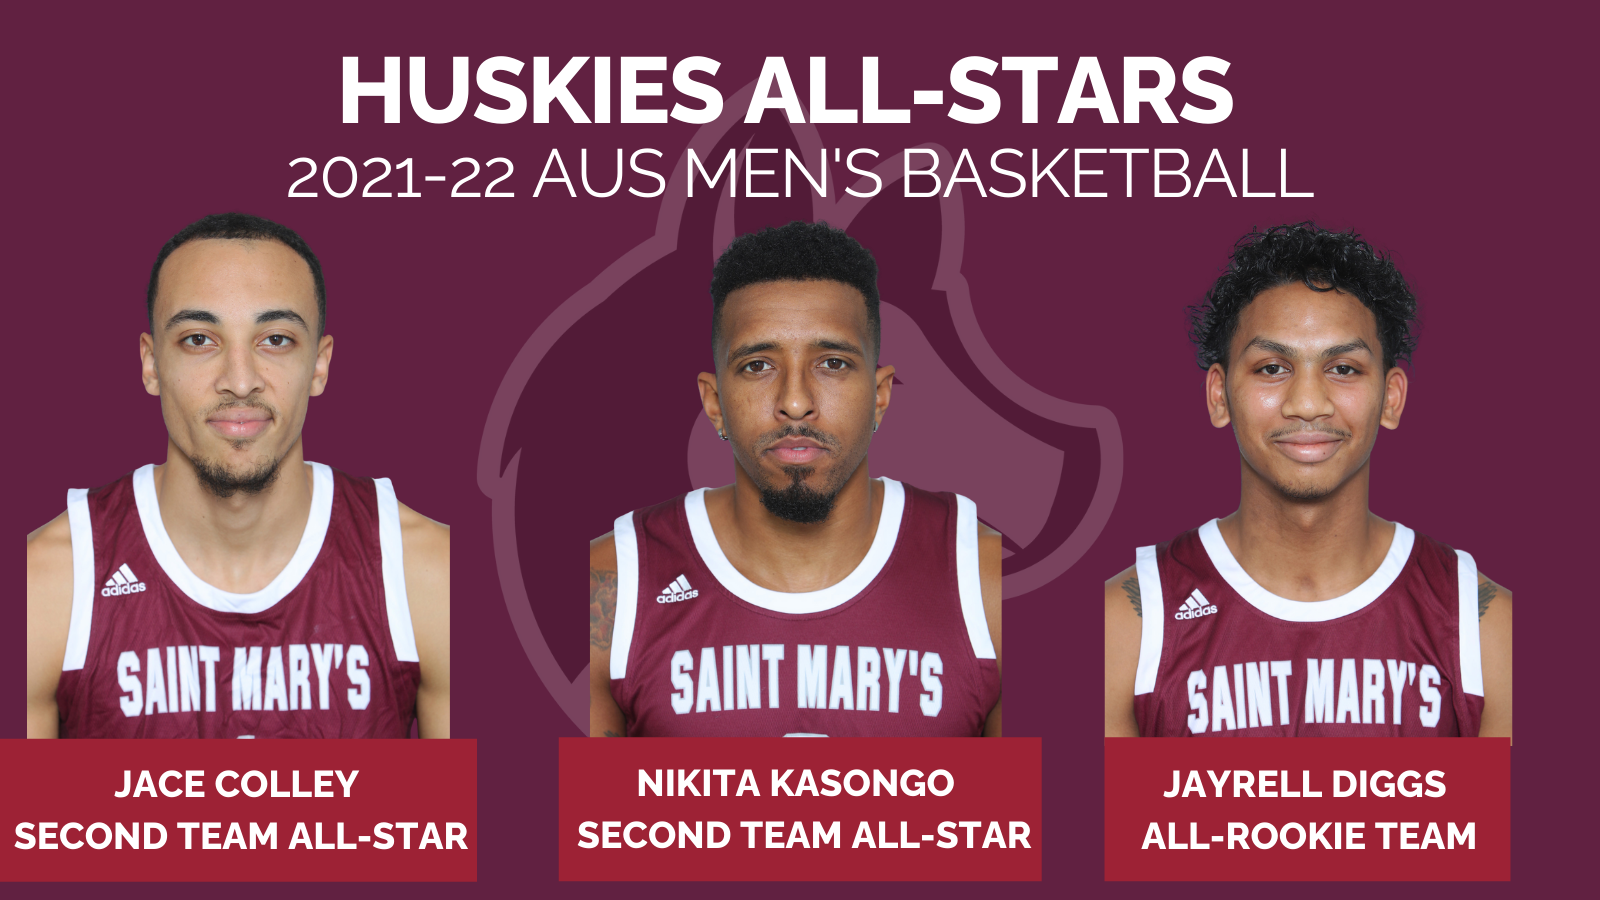 Colley, Kasongo named AUS All-Stars, Diggs named to All-Rookie team